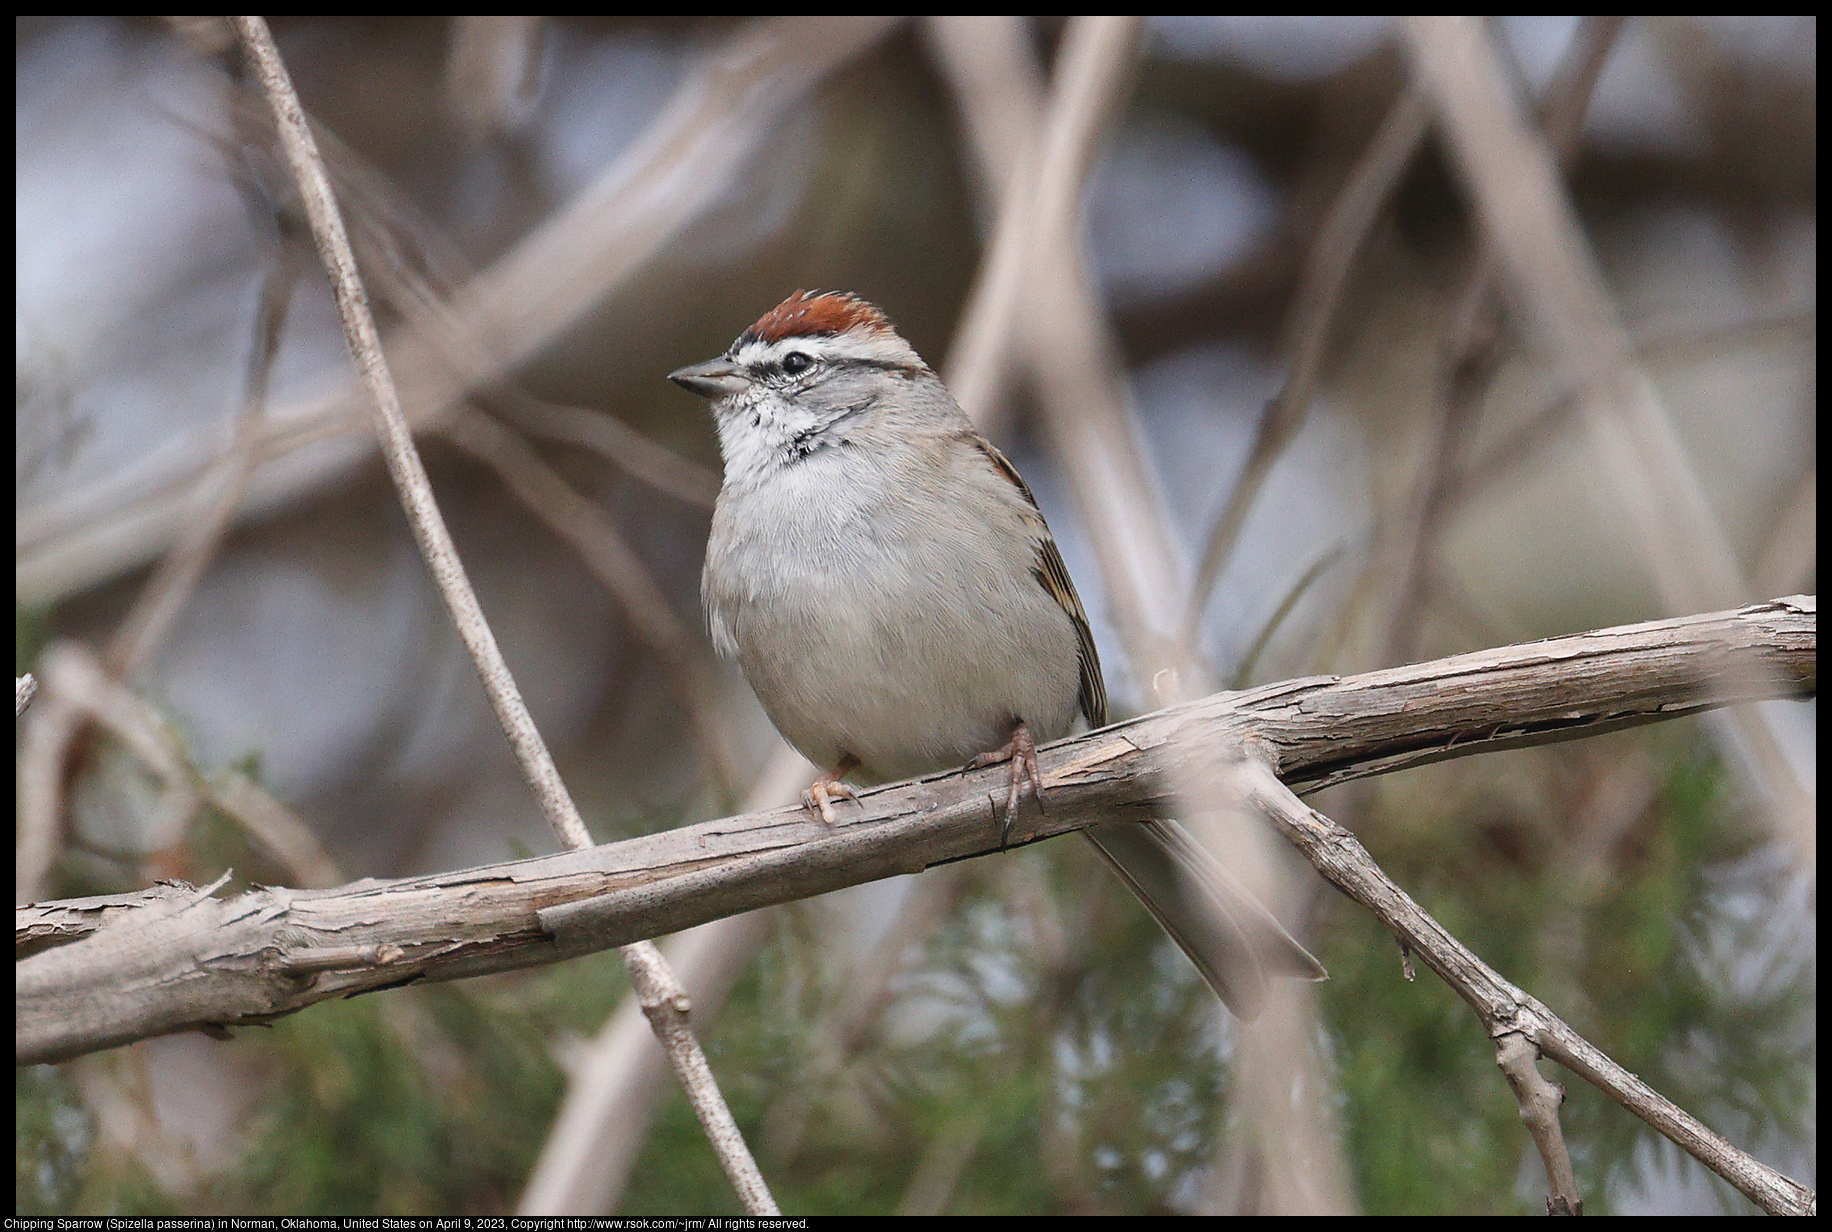 Chipping Sparrow (Spizella passerina) in Norman, Oklahoma, United States on April 9, 2023